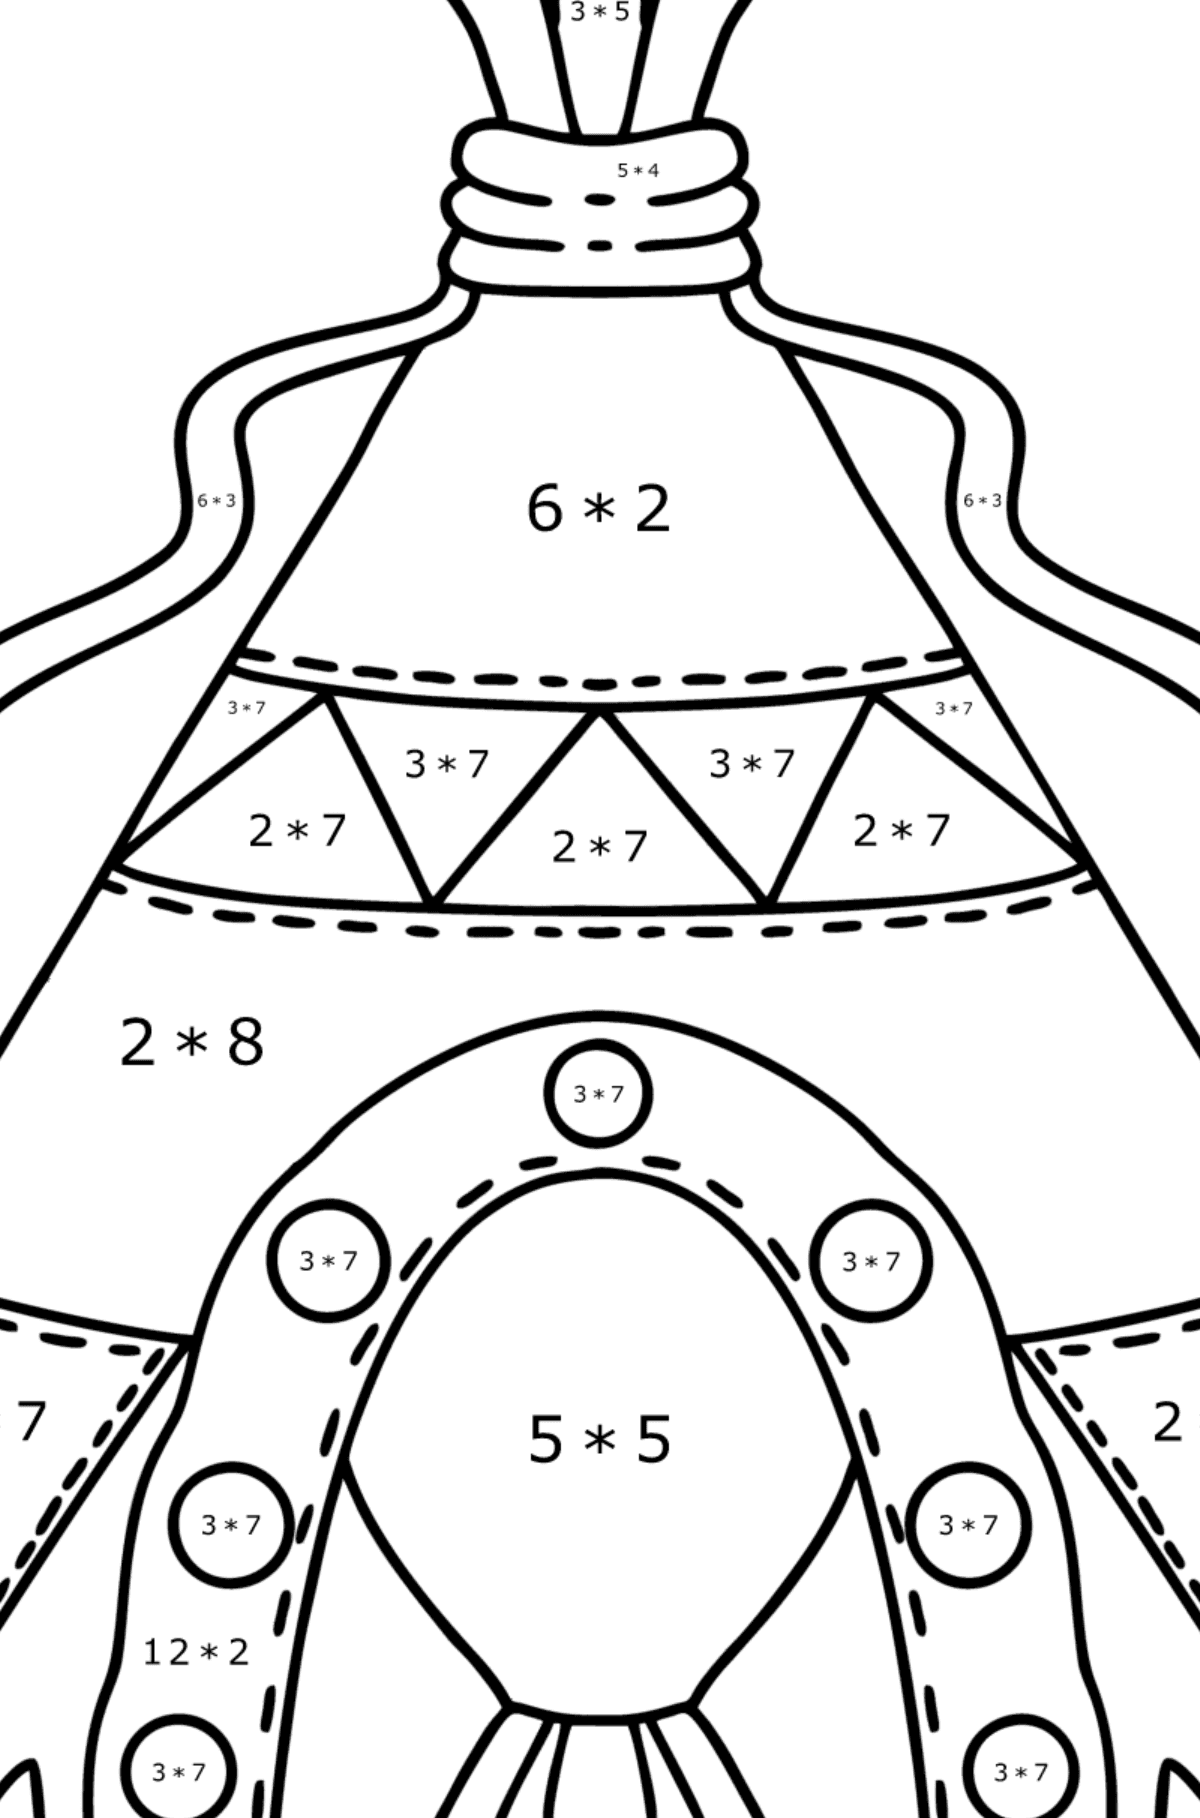 Tepee coloring page - Math Coloring - Multiplication for Kids